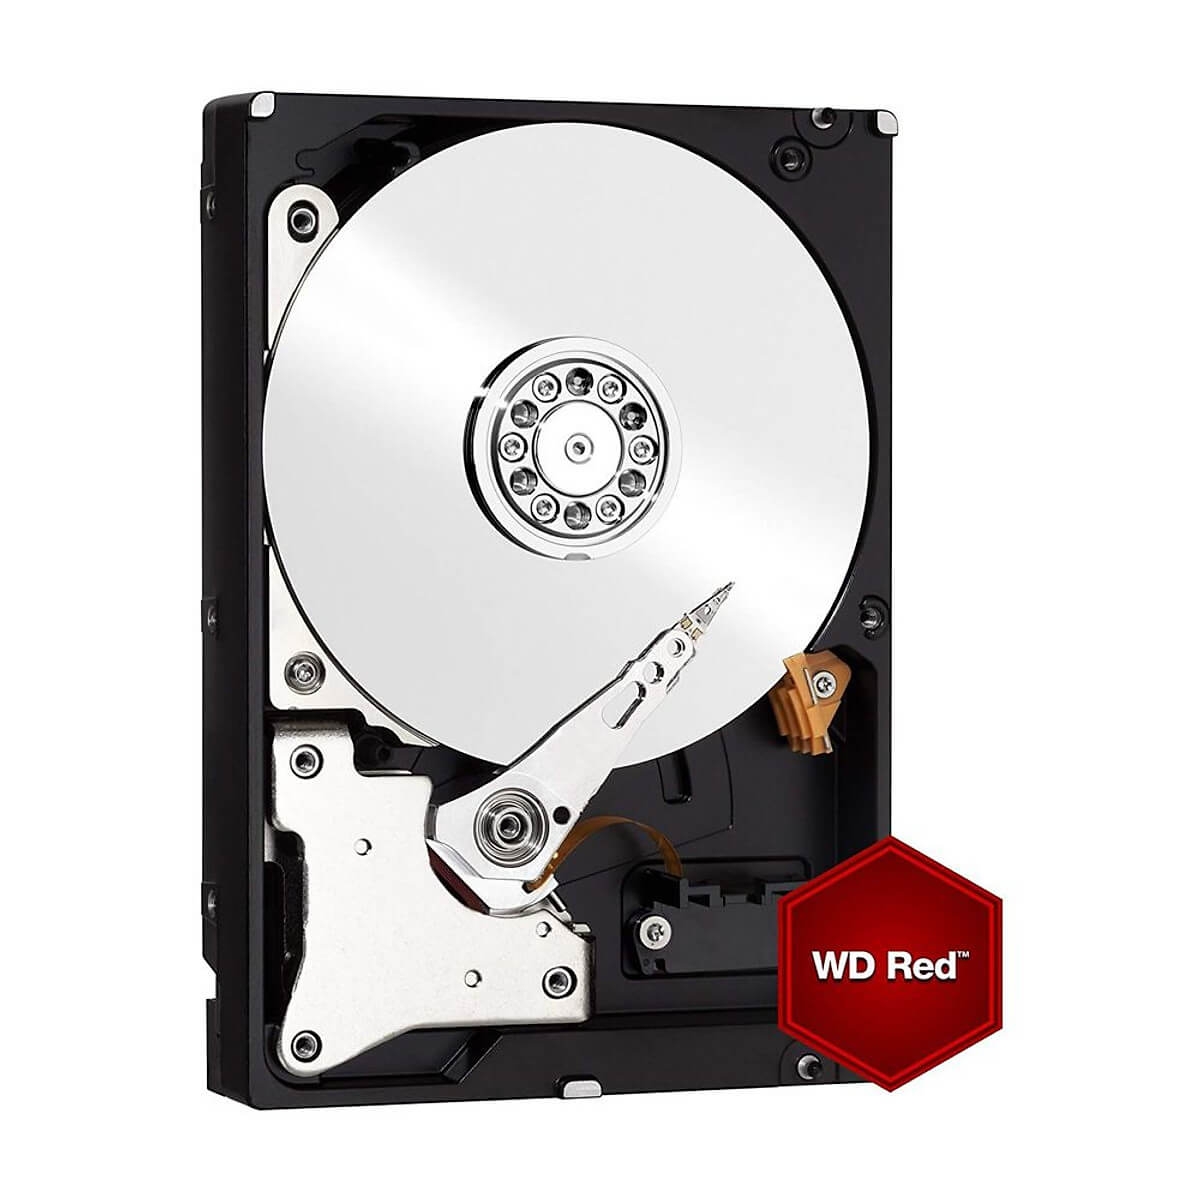 Ổ Cứng HDD NAS WD Red 10TB - WD101EFBX